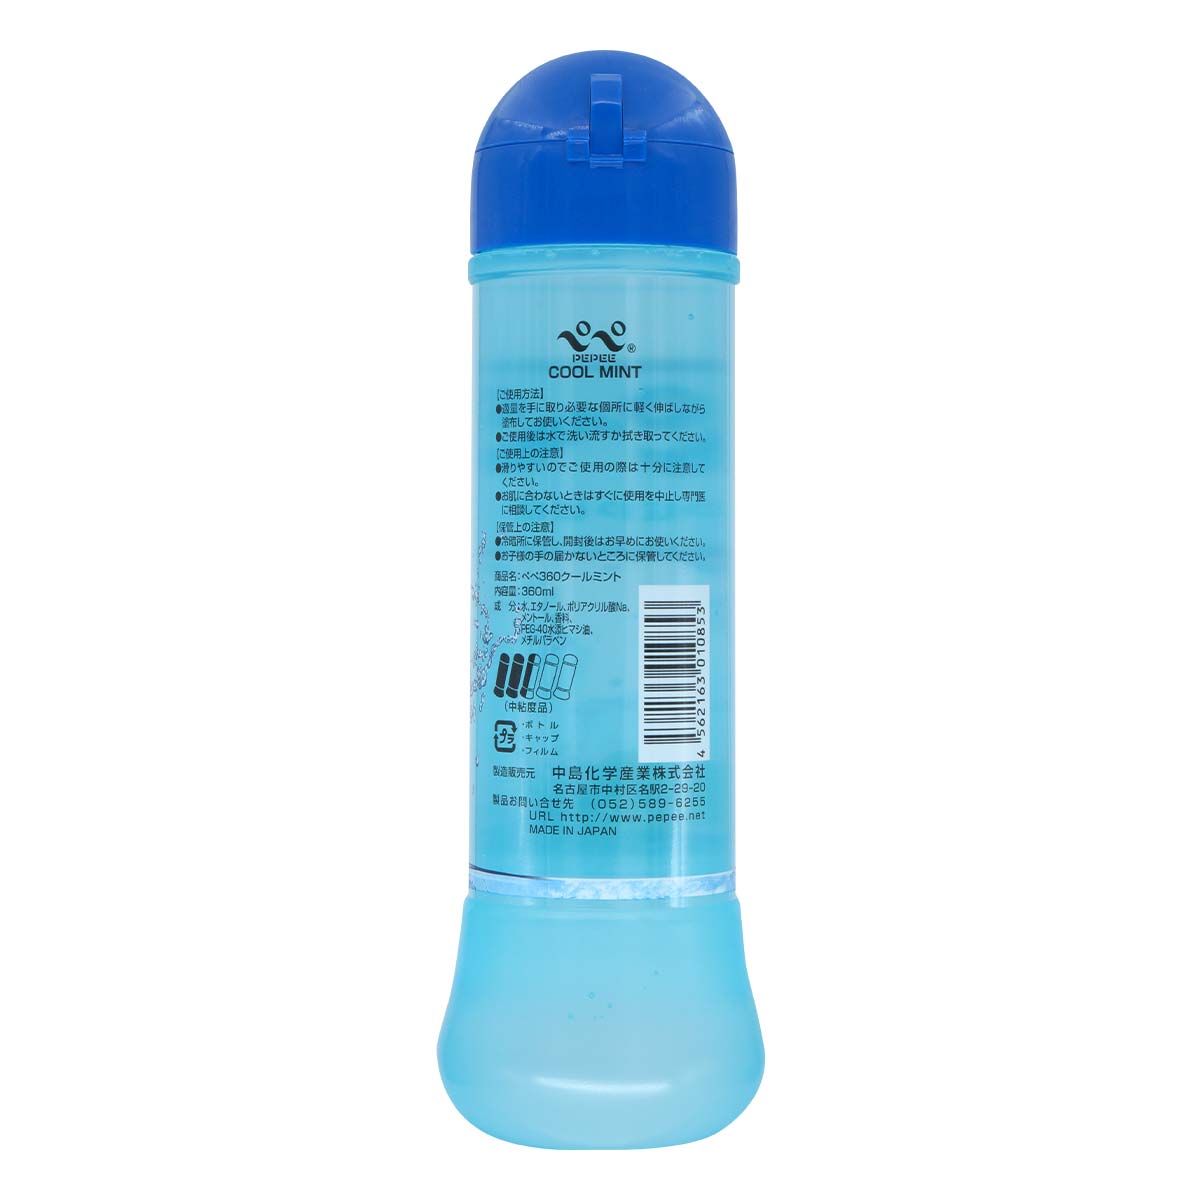 PEPEE 360 Cool Mint 360ml water-based lubricant-p_3